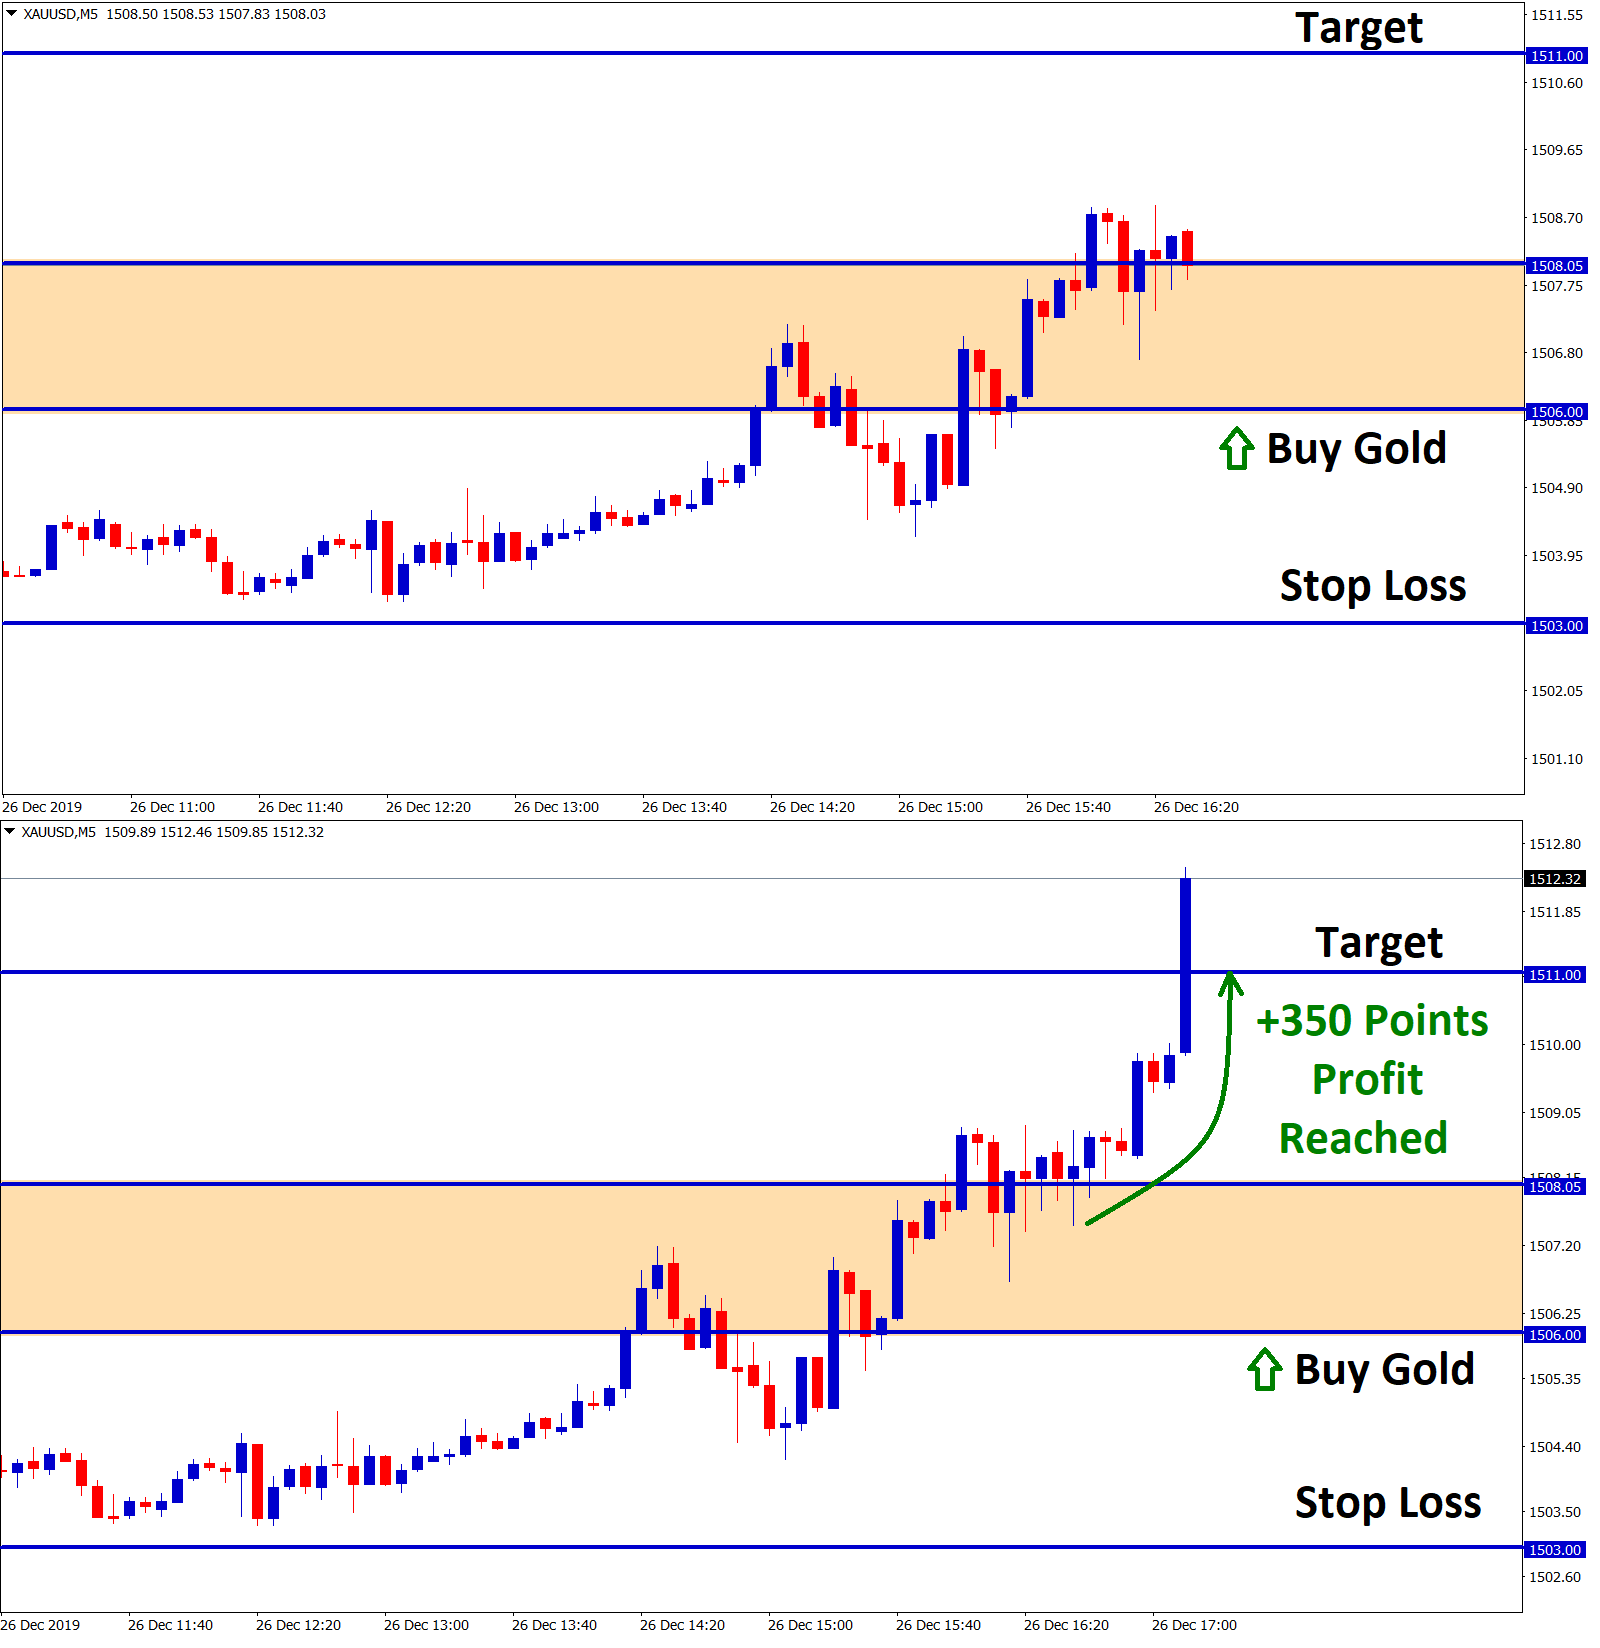 gold touched the take profit